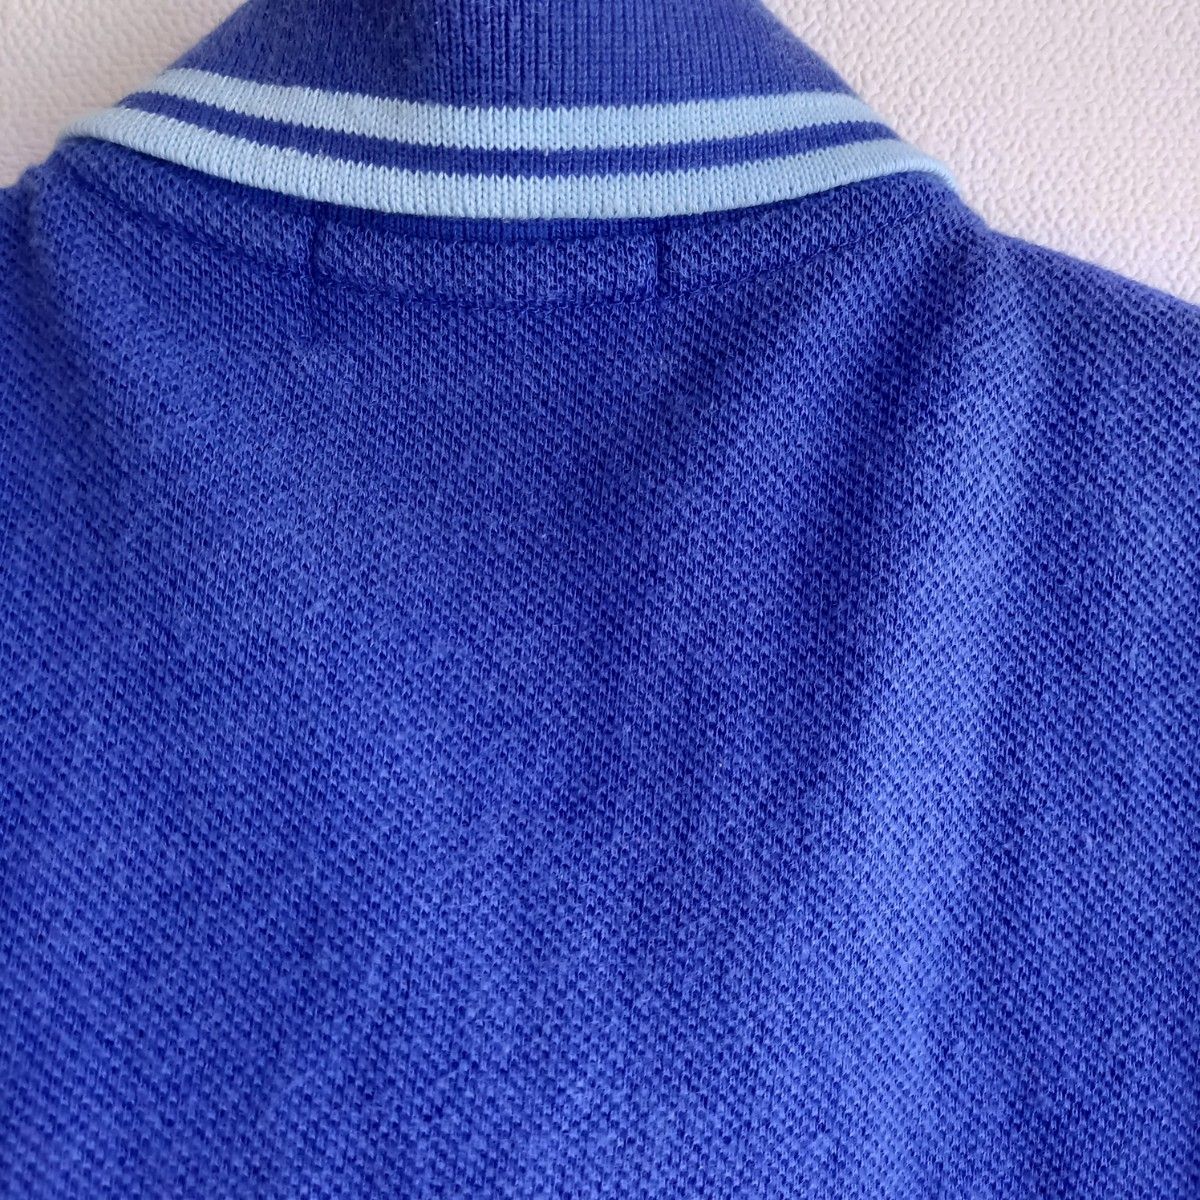 FRED PERRY 90sポロシャツ 月桂樹刺繍